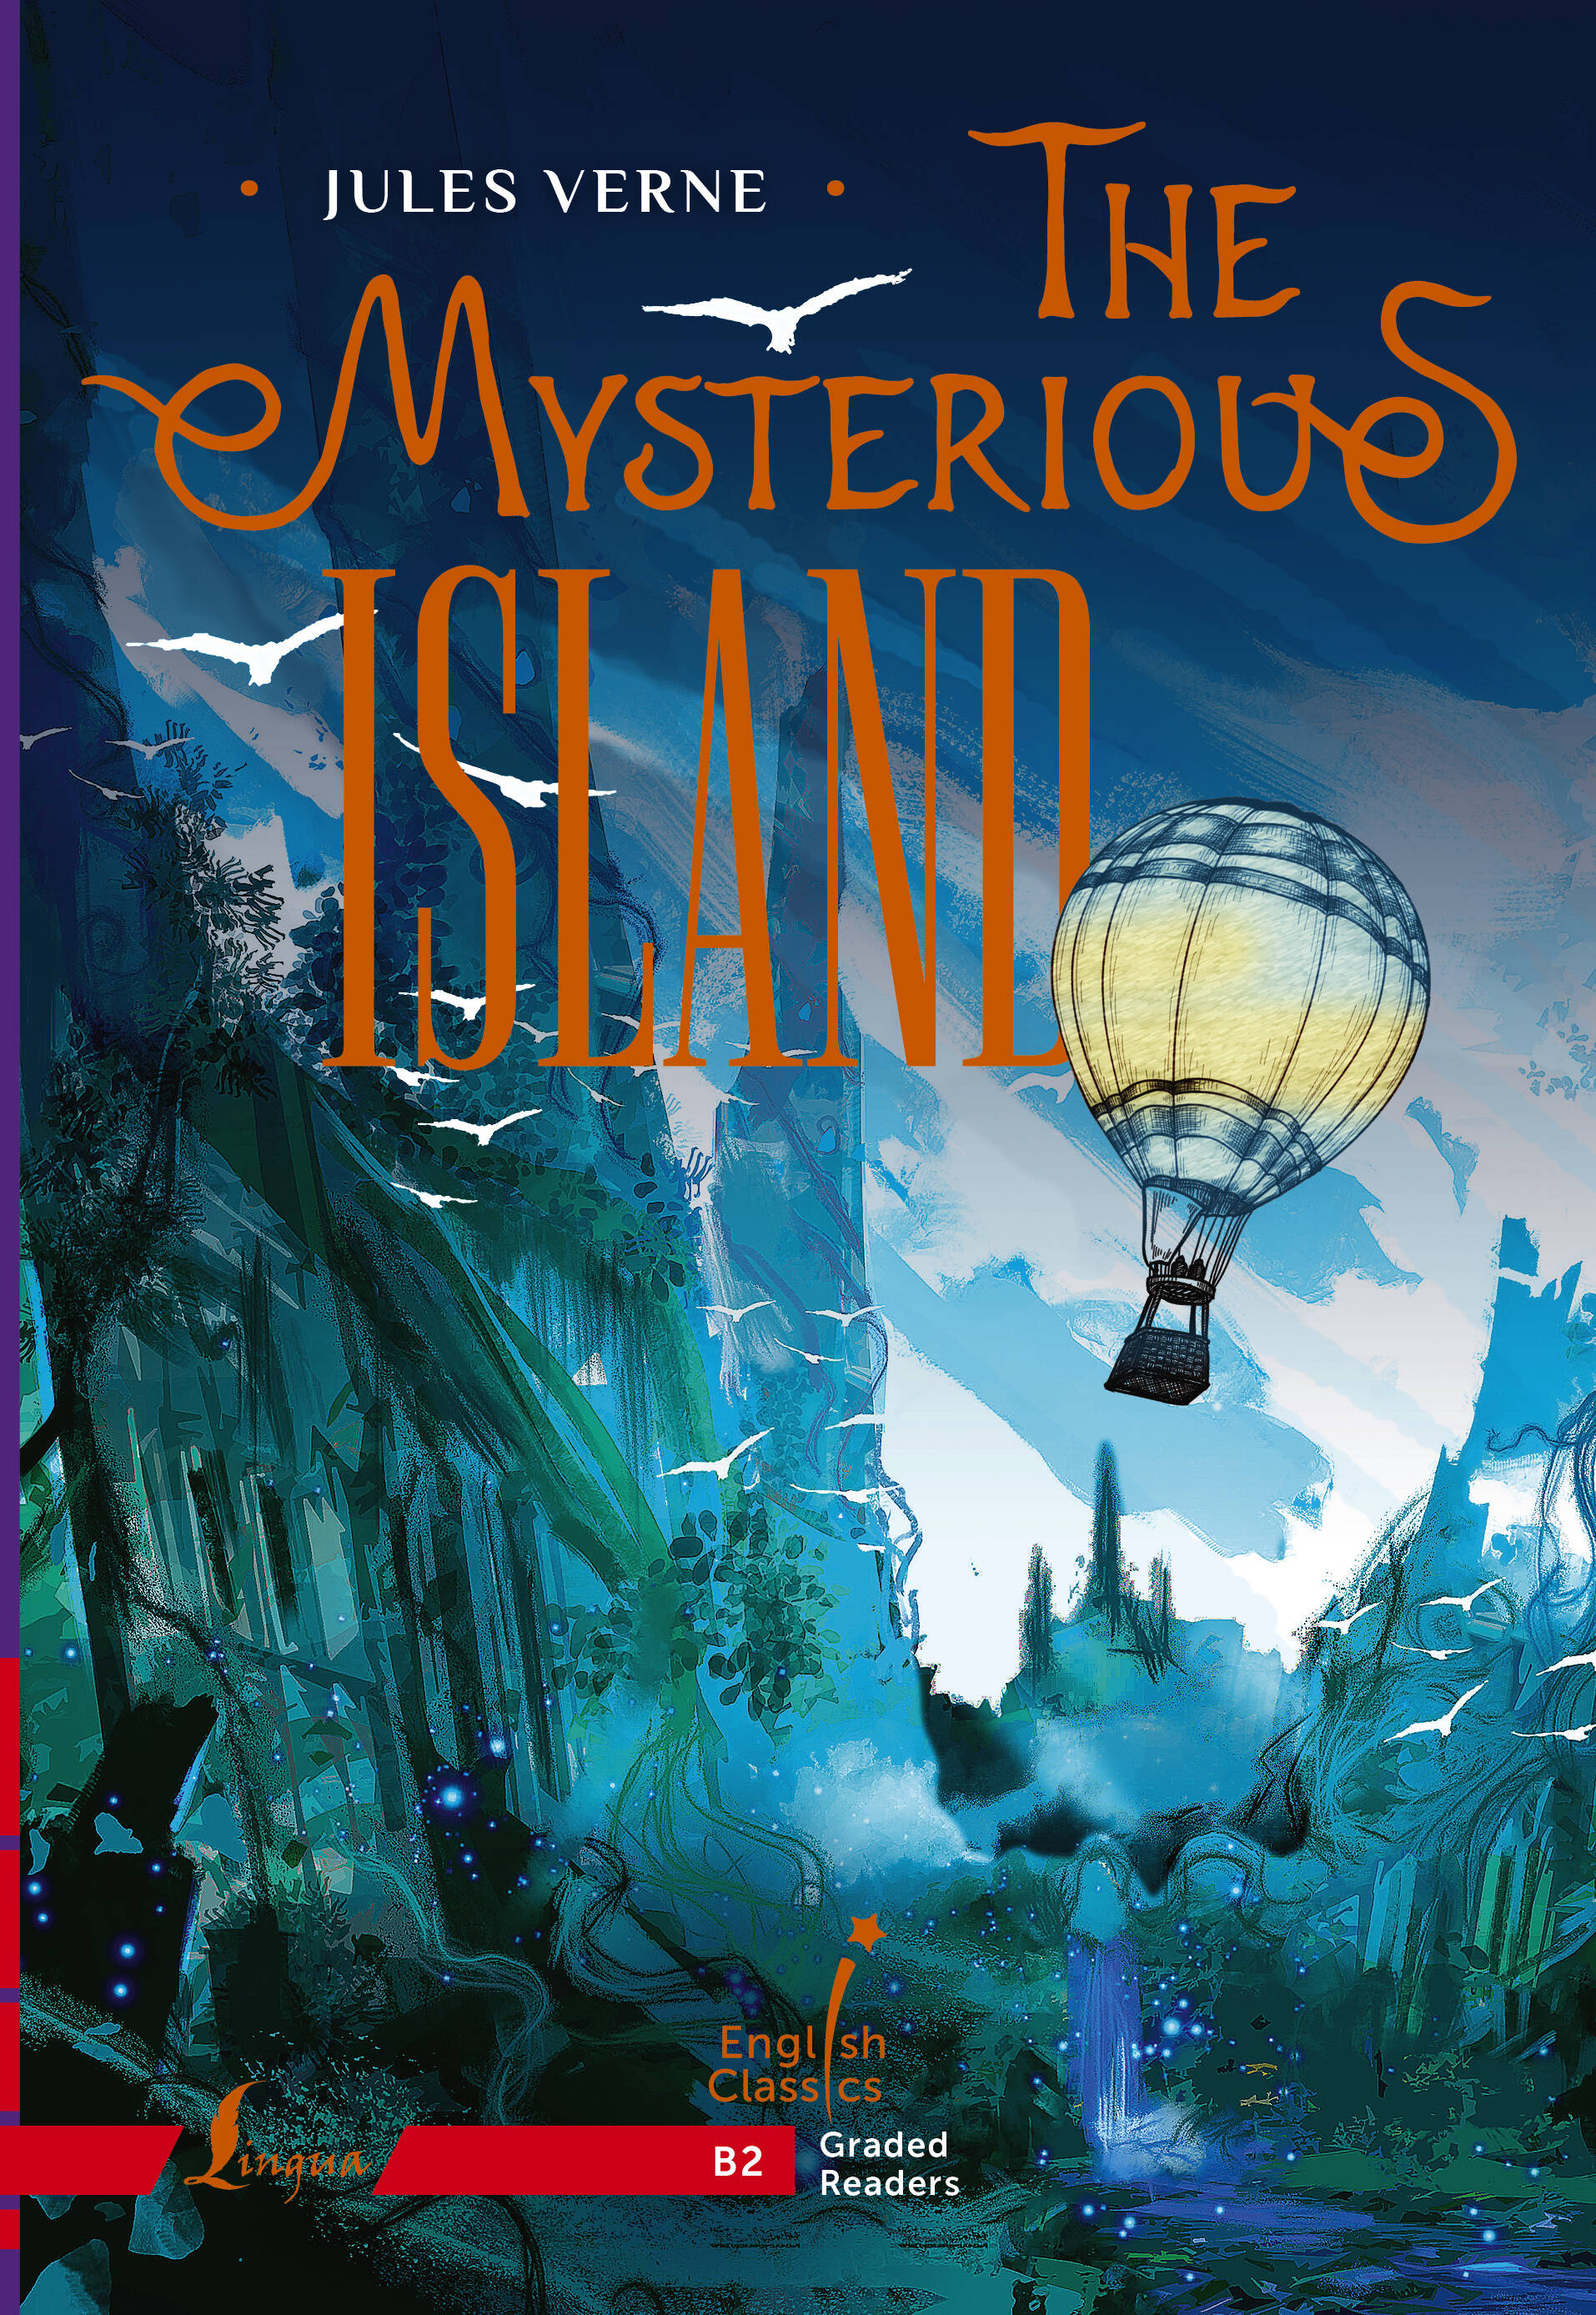 The Mysterious Island. B2 verne j the mysterious island